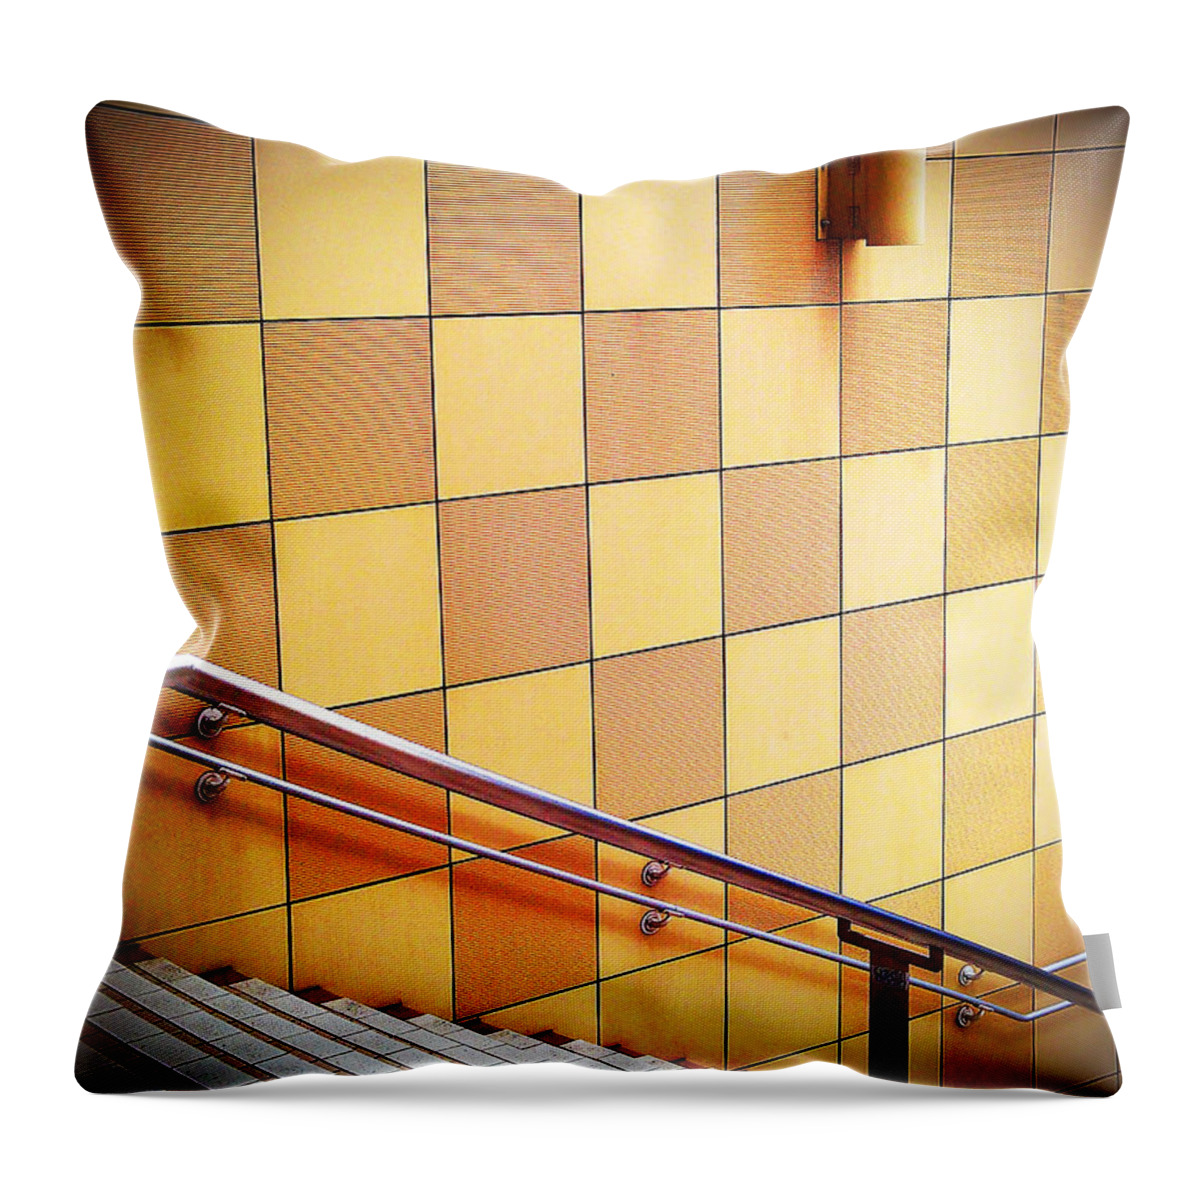 Stairs Throw Pillow featuring the photograph Wall Abstract by Eena Bo